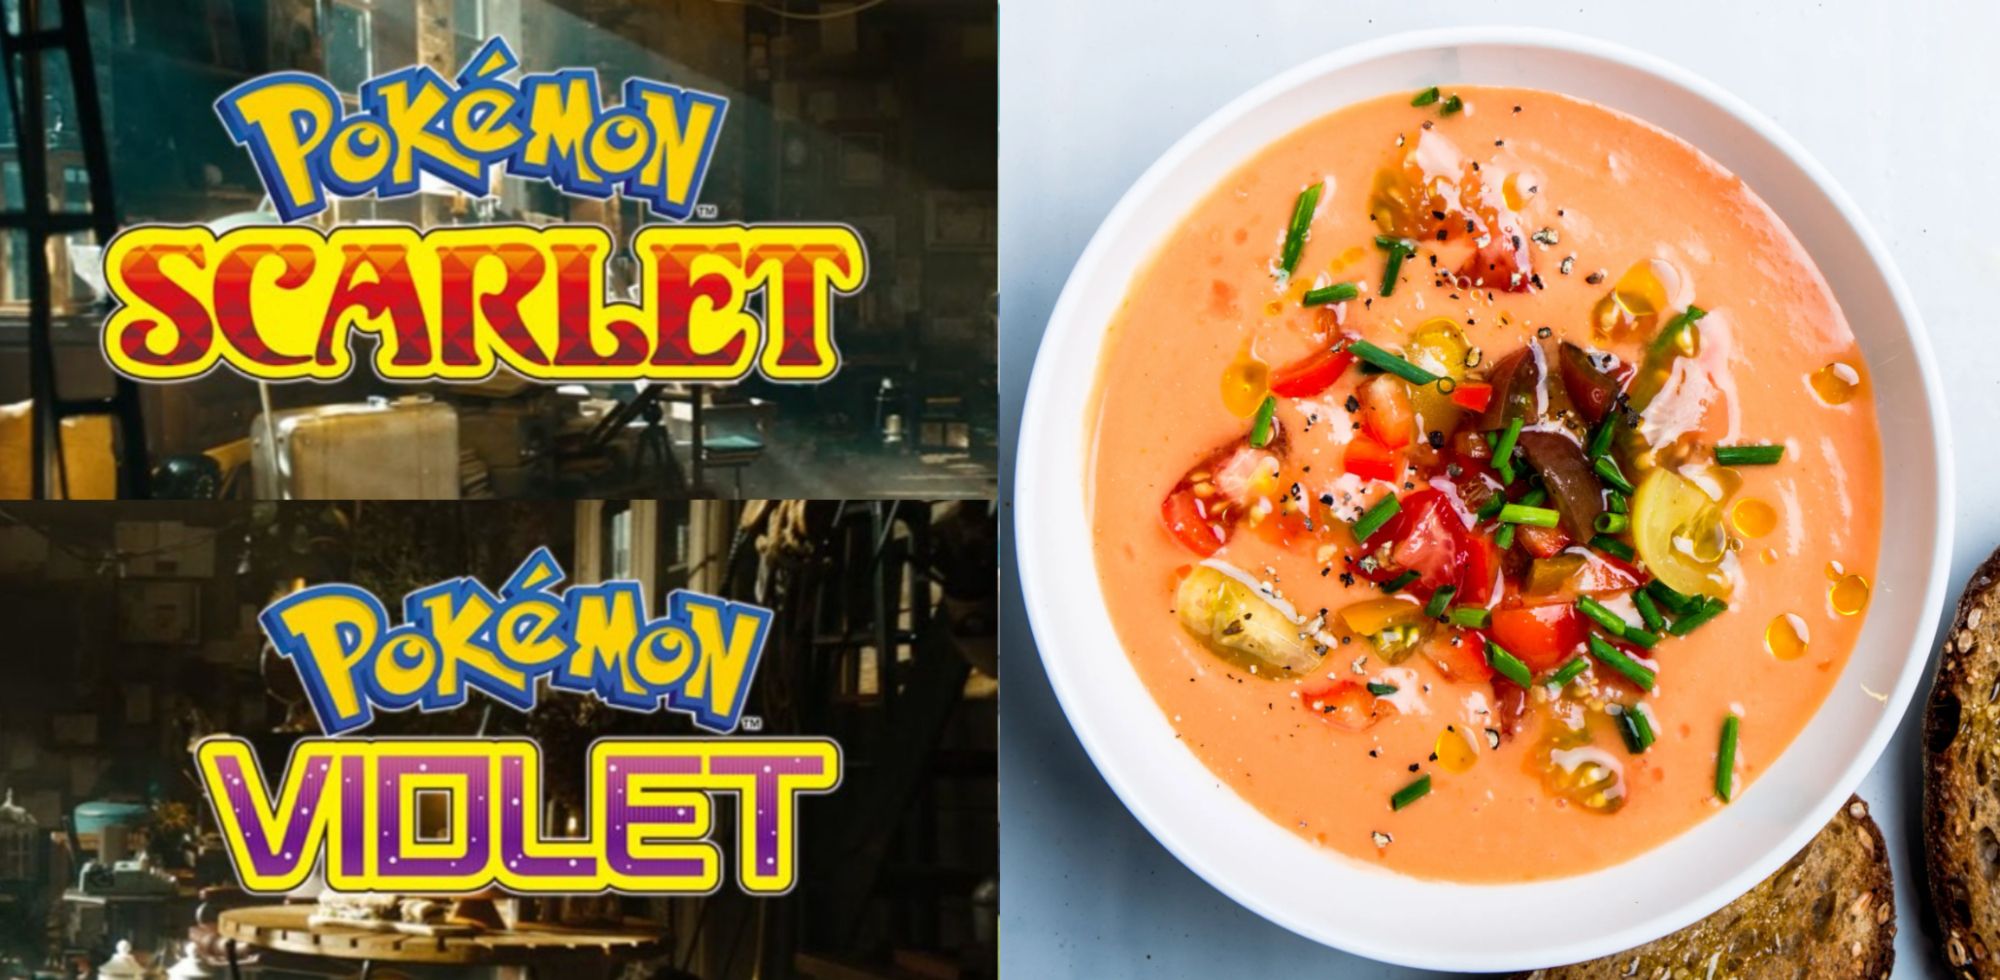 Split image showing the Logos for Pokémon Scarlet & Violet and a plate of Gazpacho